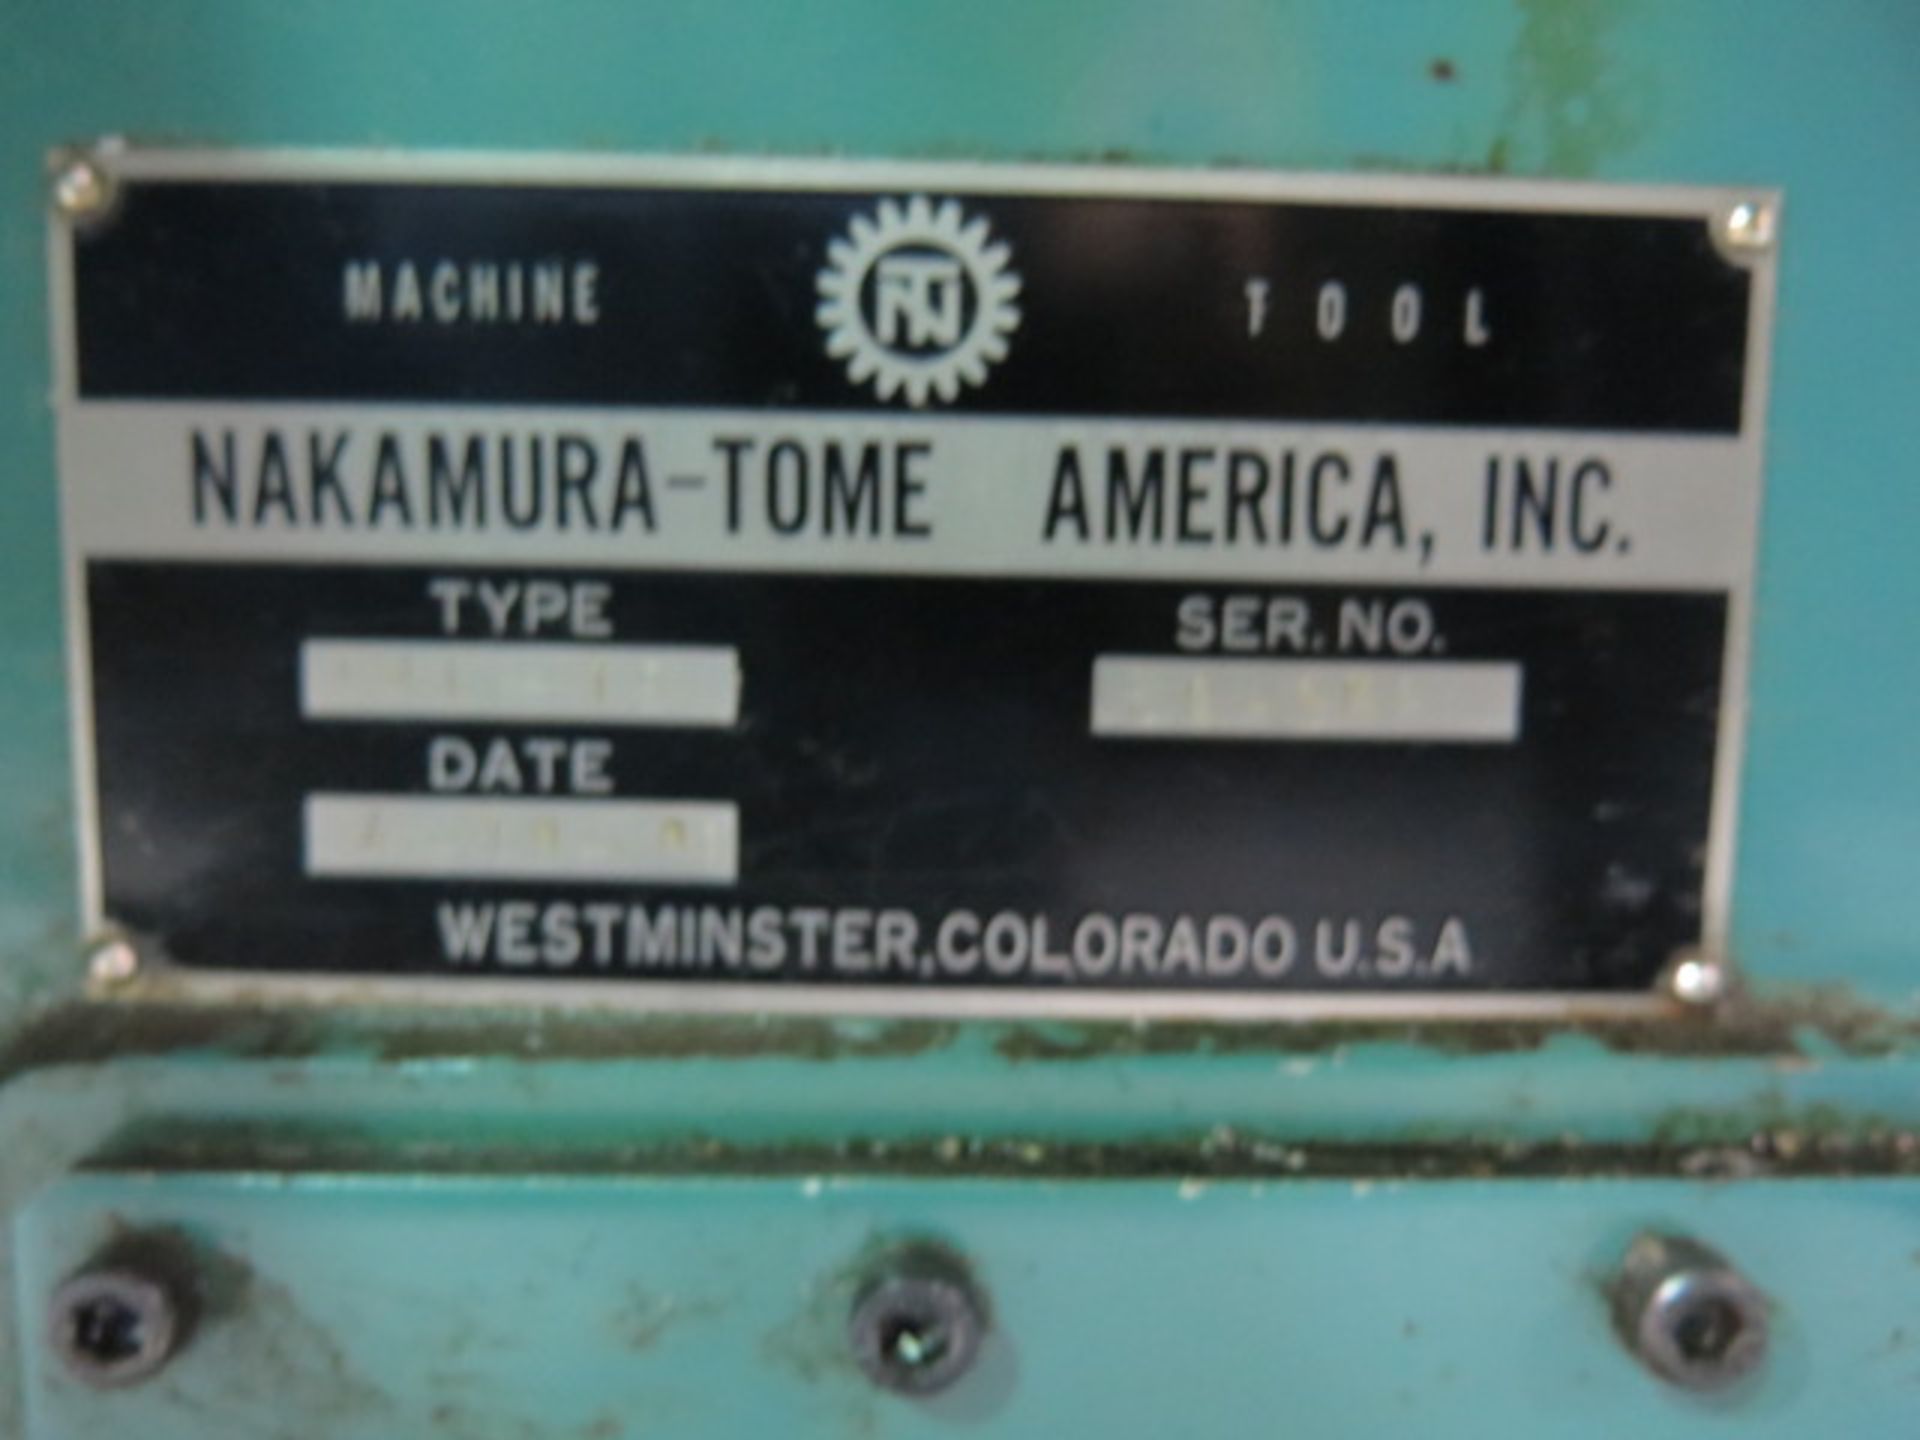 1996 Nakamura Tome TMC-15 CNC Turning Center s/n E04904 w/ Fanuc Series 0-T Controls, 10-Station - Image 9 of 10